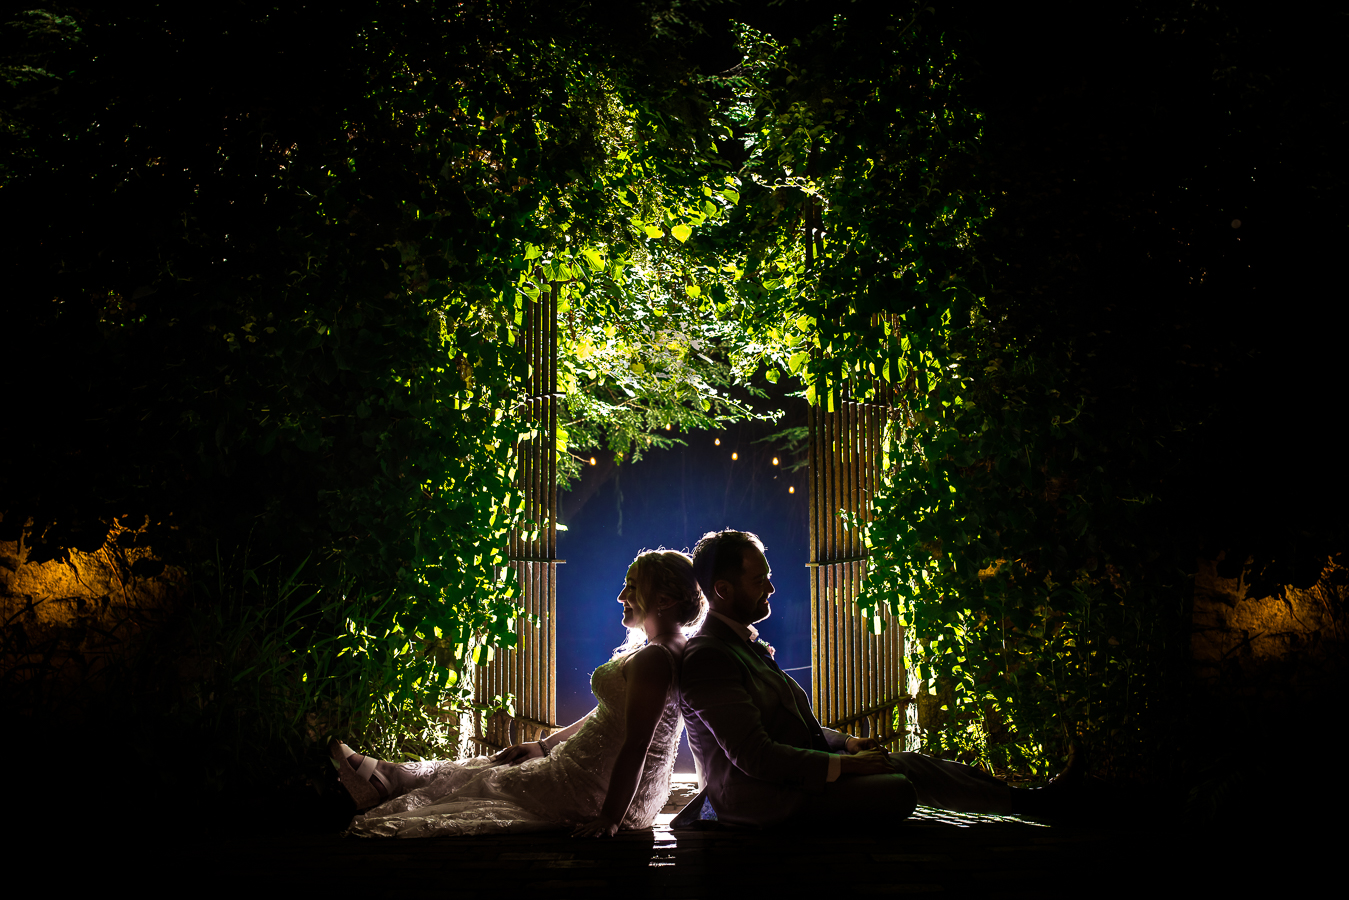 Lisa rhinehart, captures this unique, creative backlit image of the bride and groom sitting back to back surrounded by greenery in the archway 